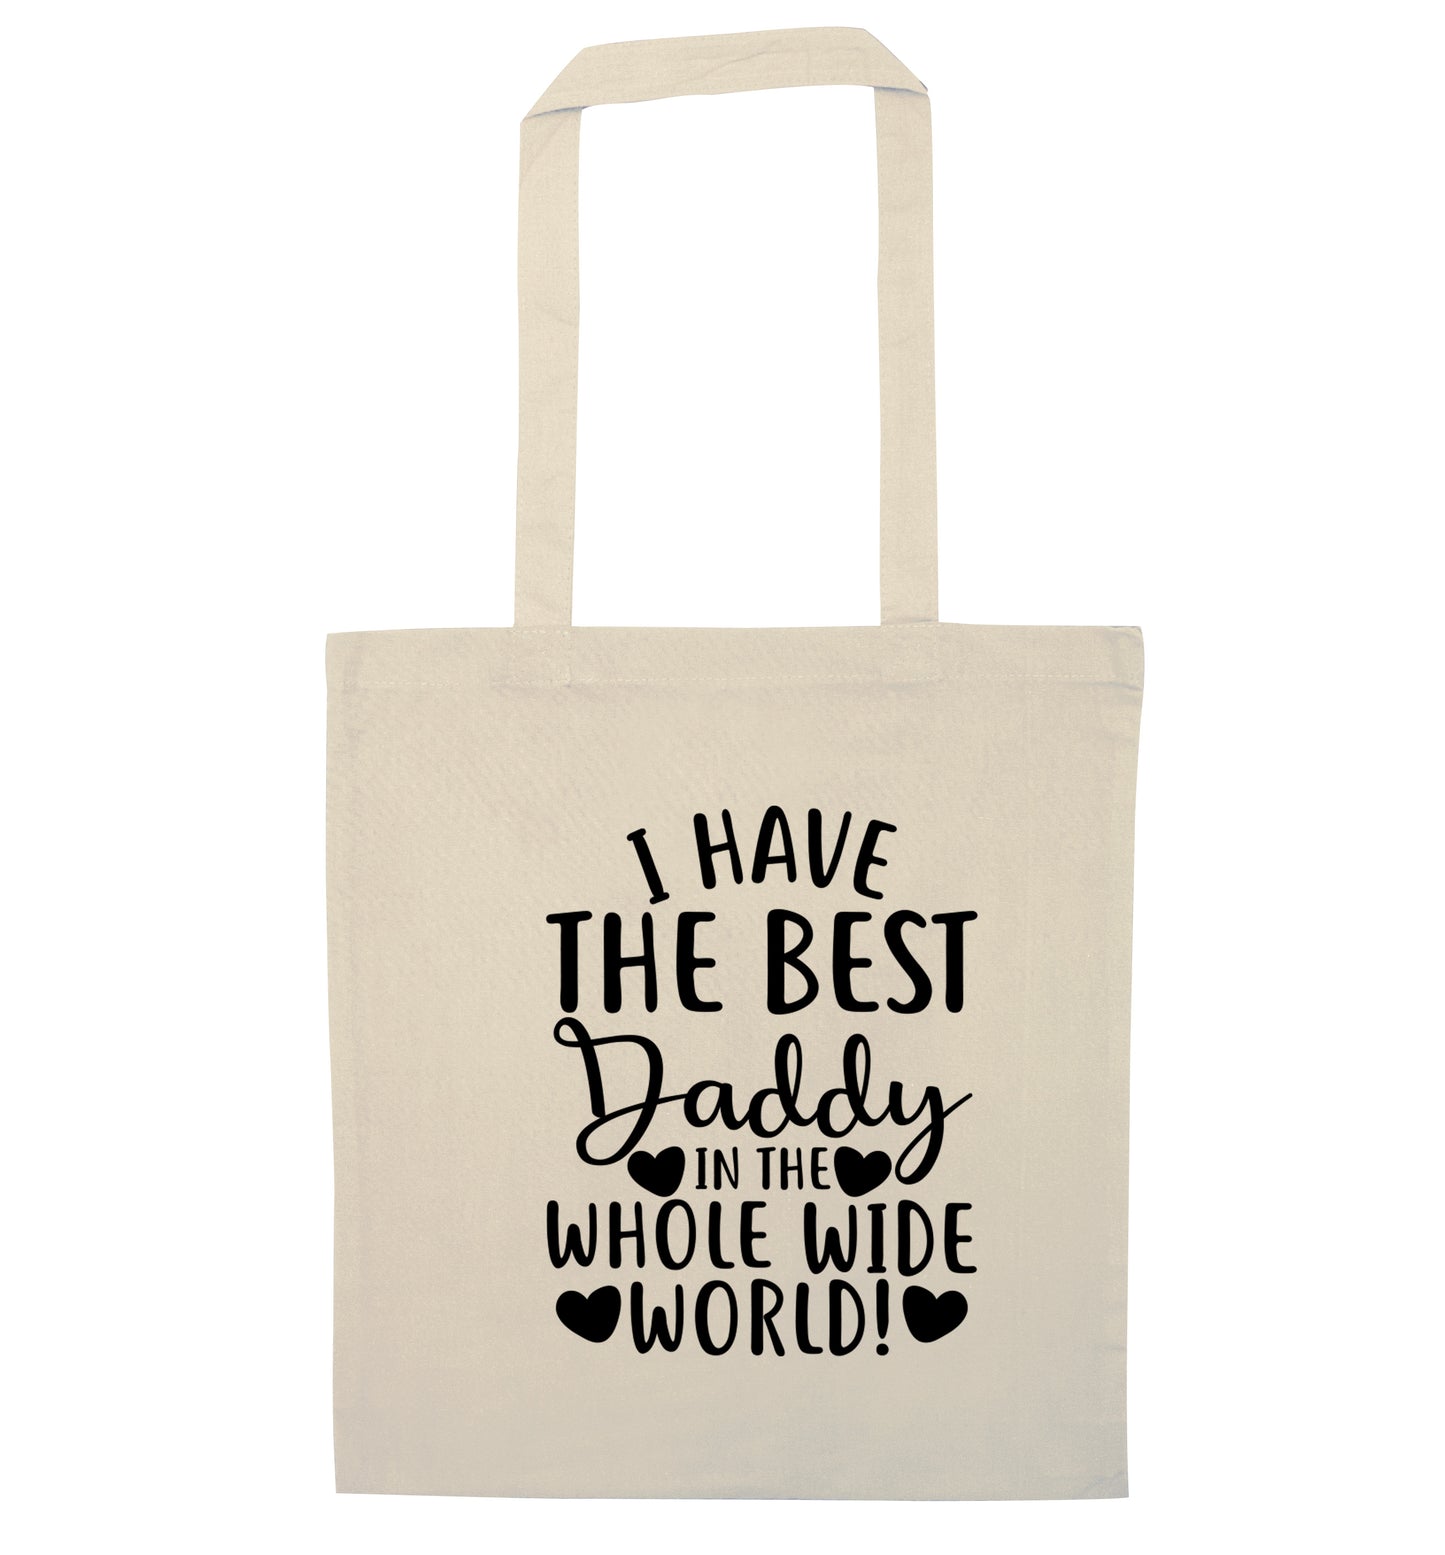 I have the best daddy in the whole wide world natural tote bag